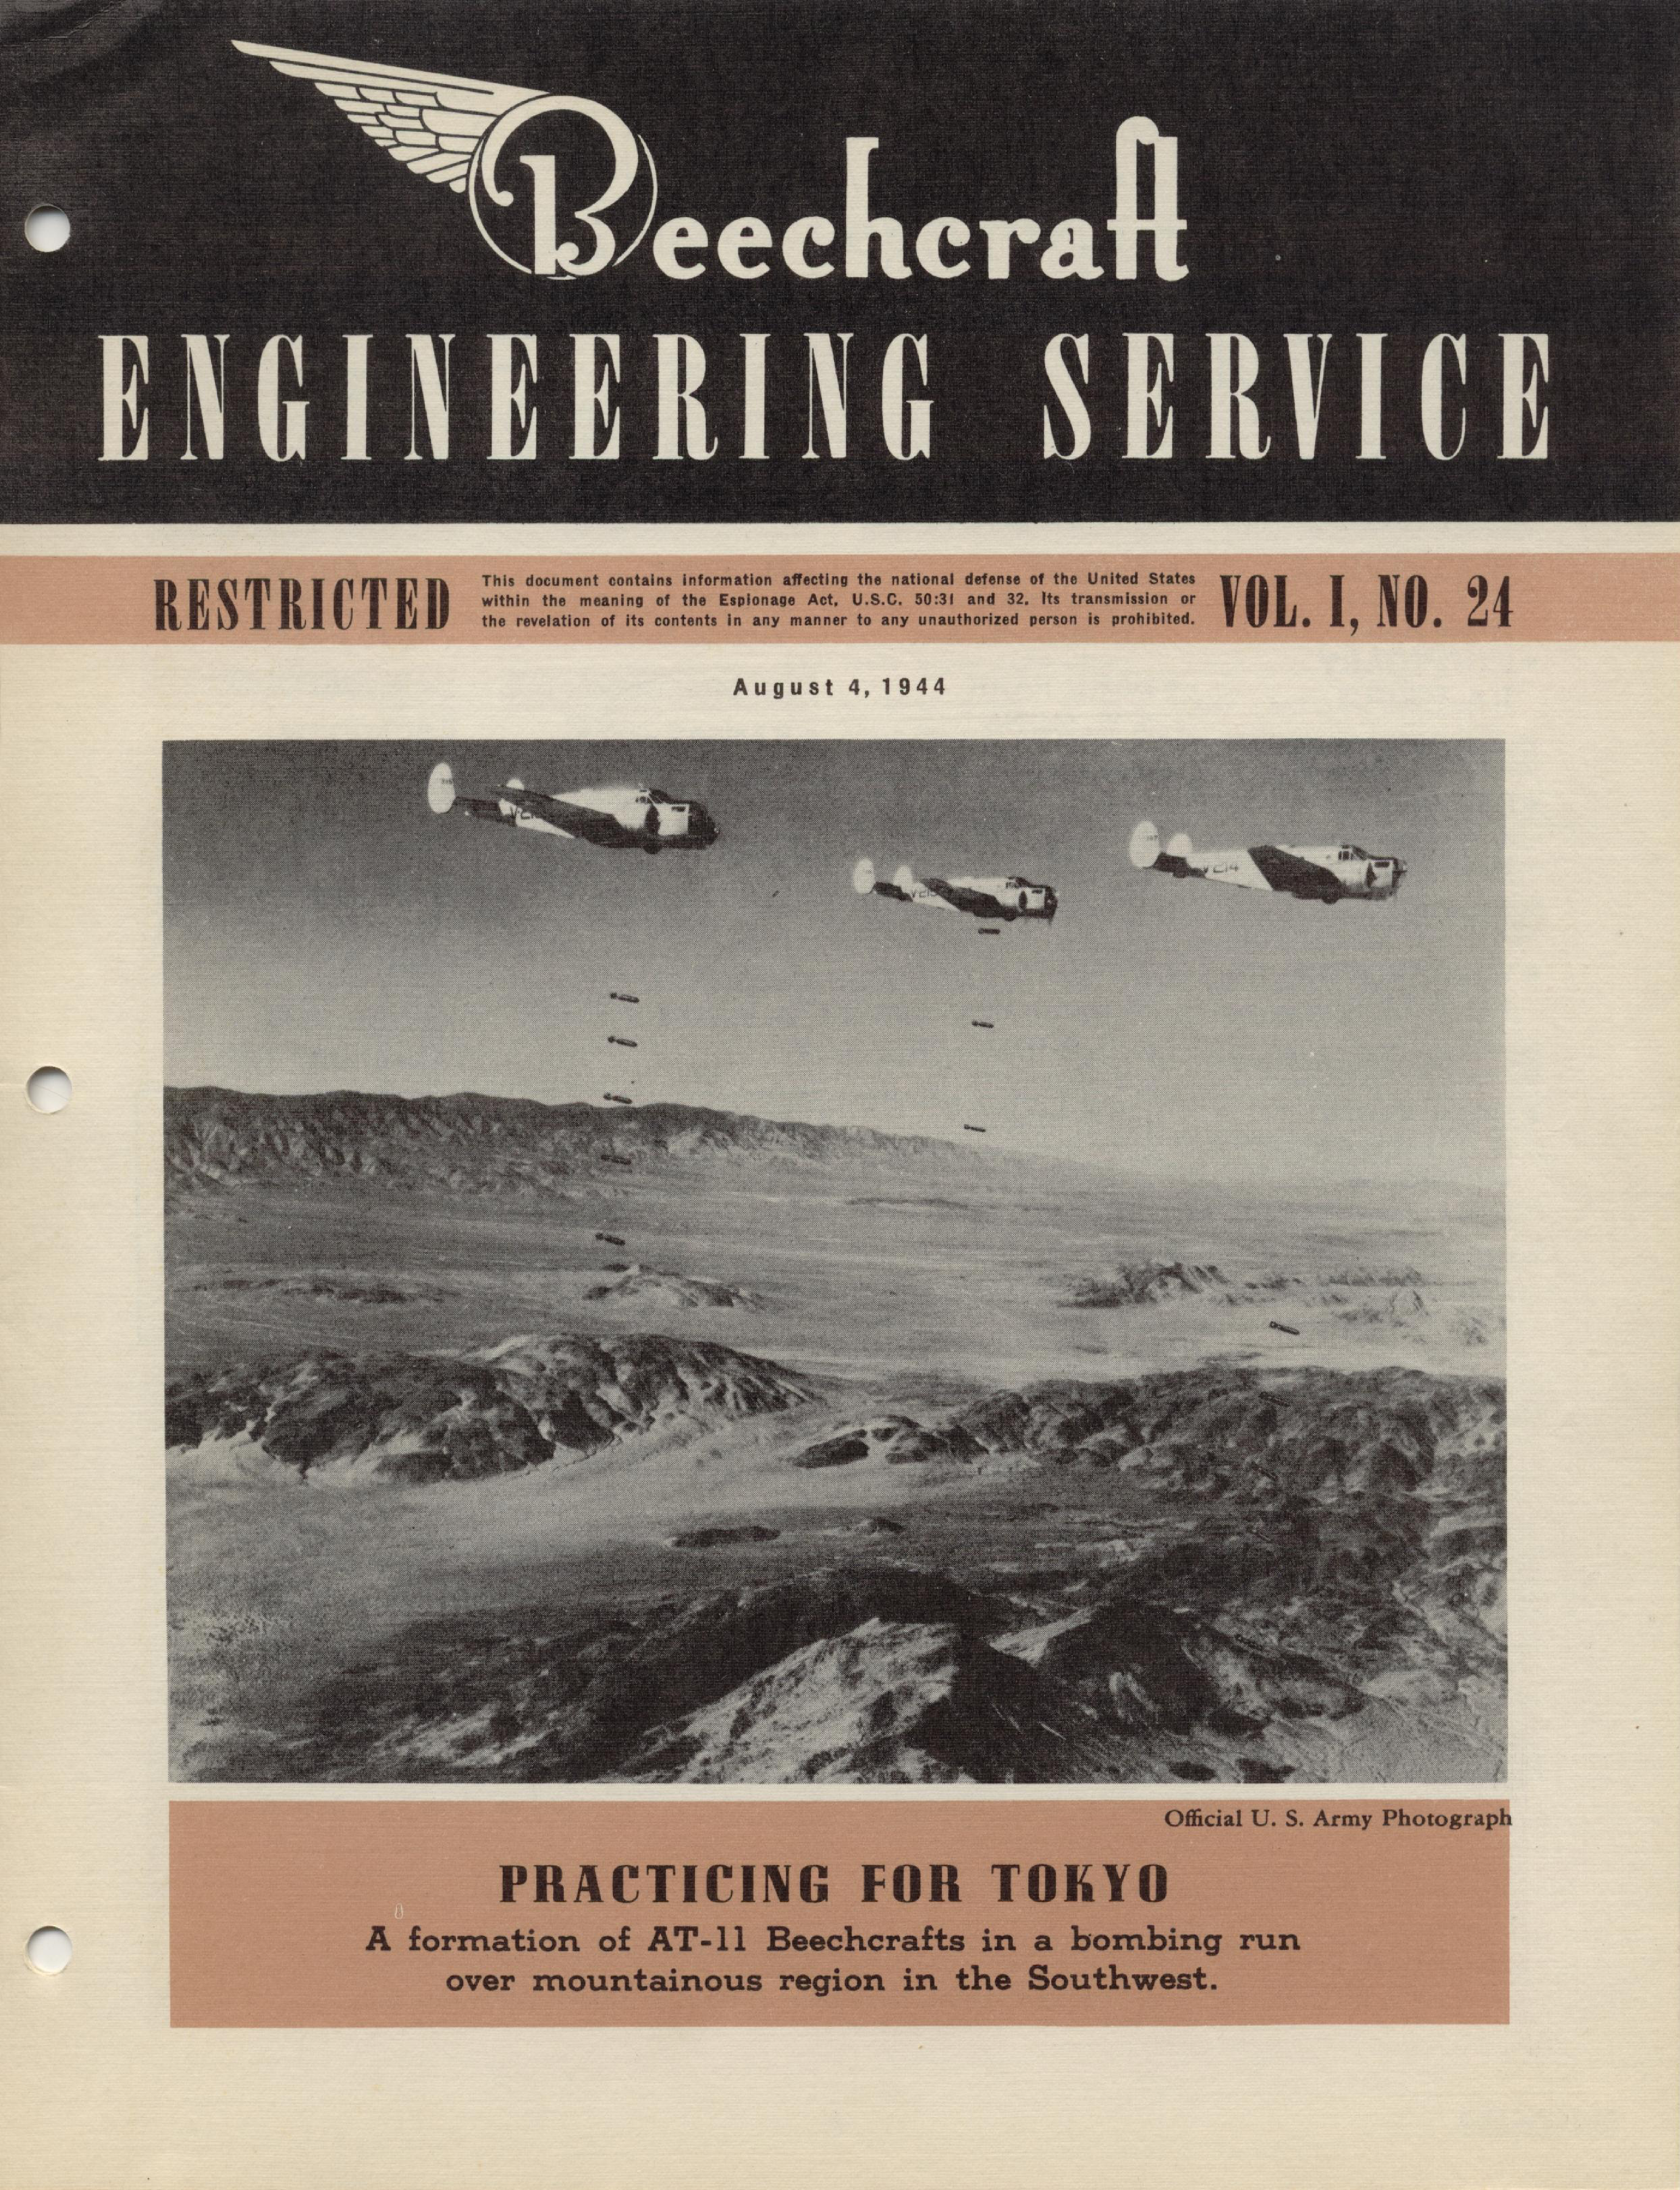 Sample page 1 from AirCorps Library document: Vol. I, No. 24 - Beechcraft Engineering Service